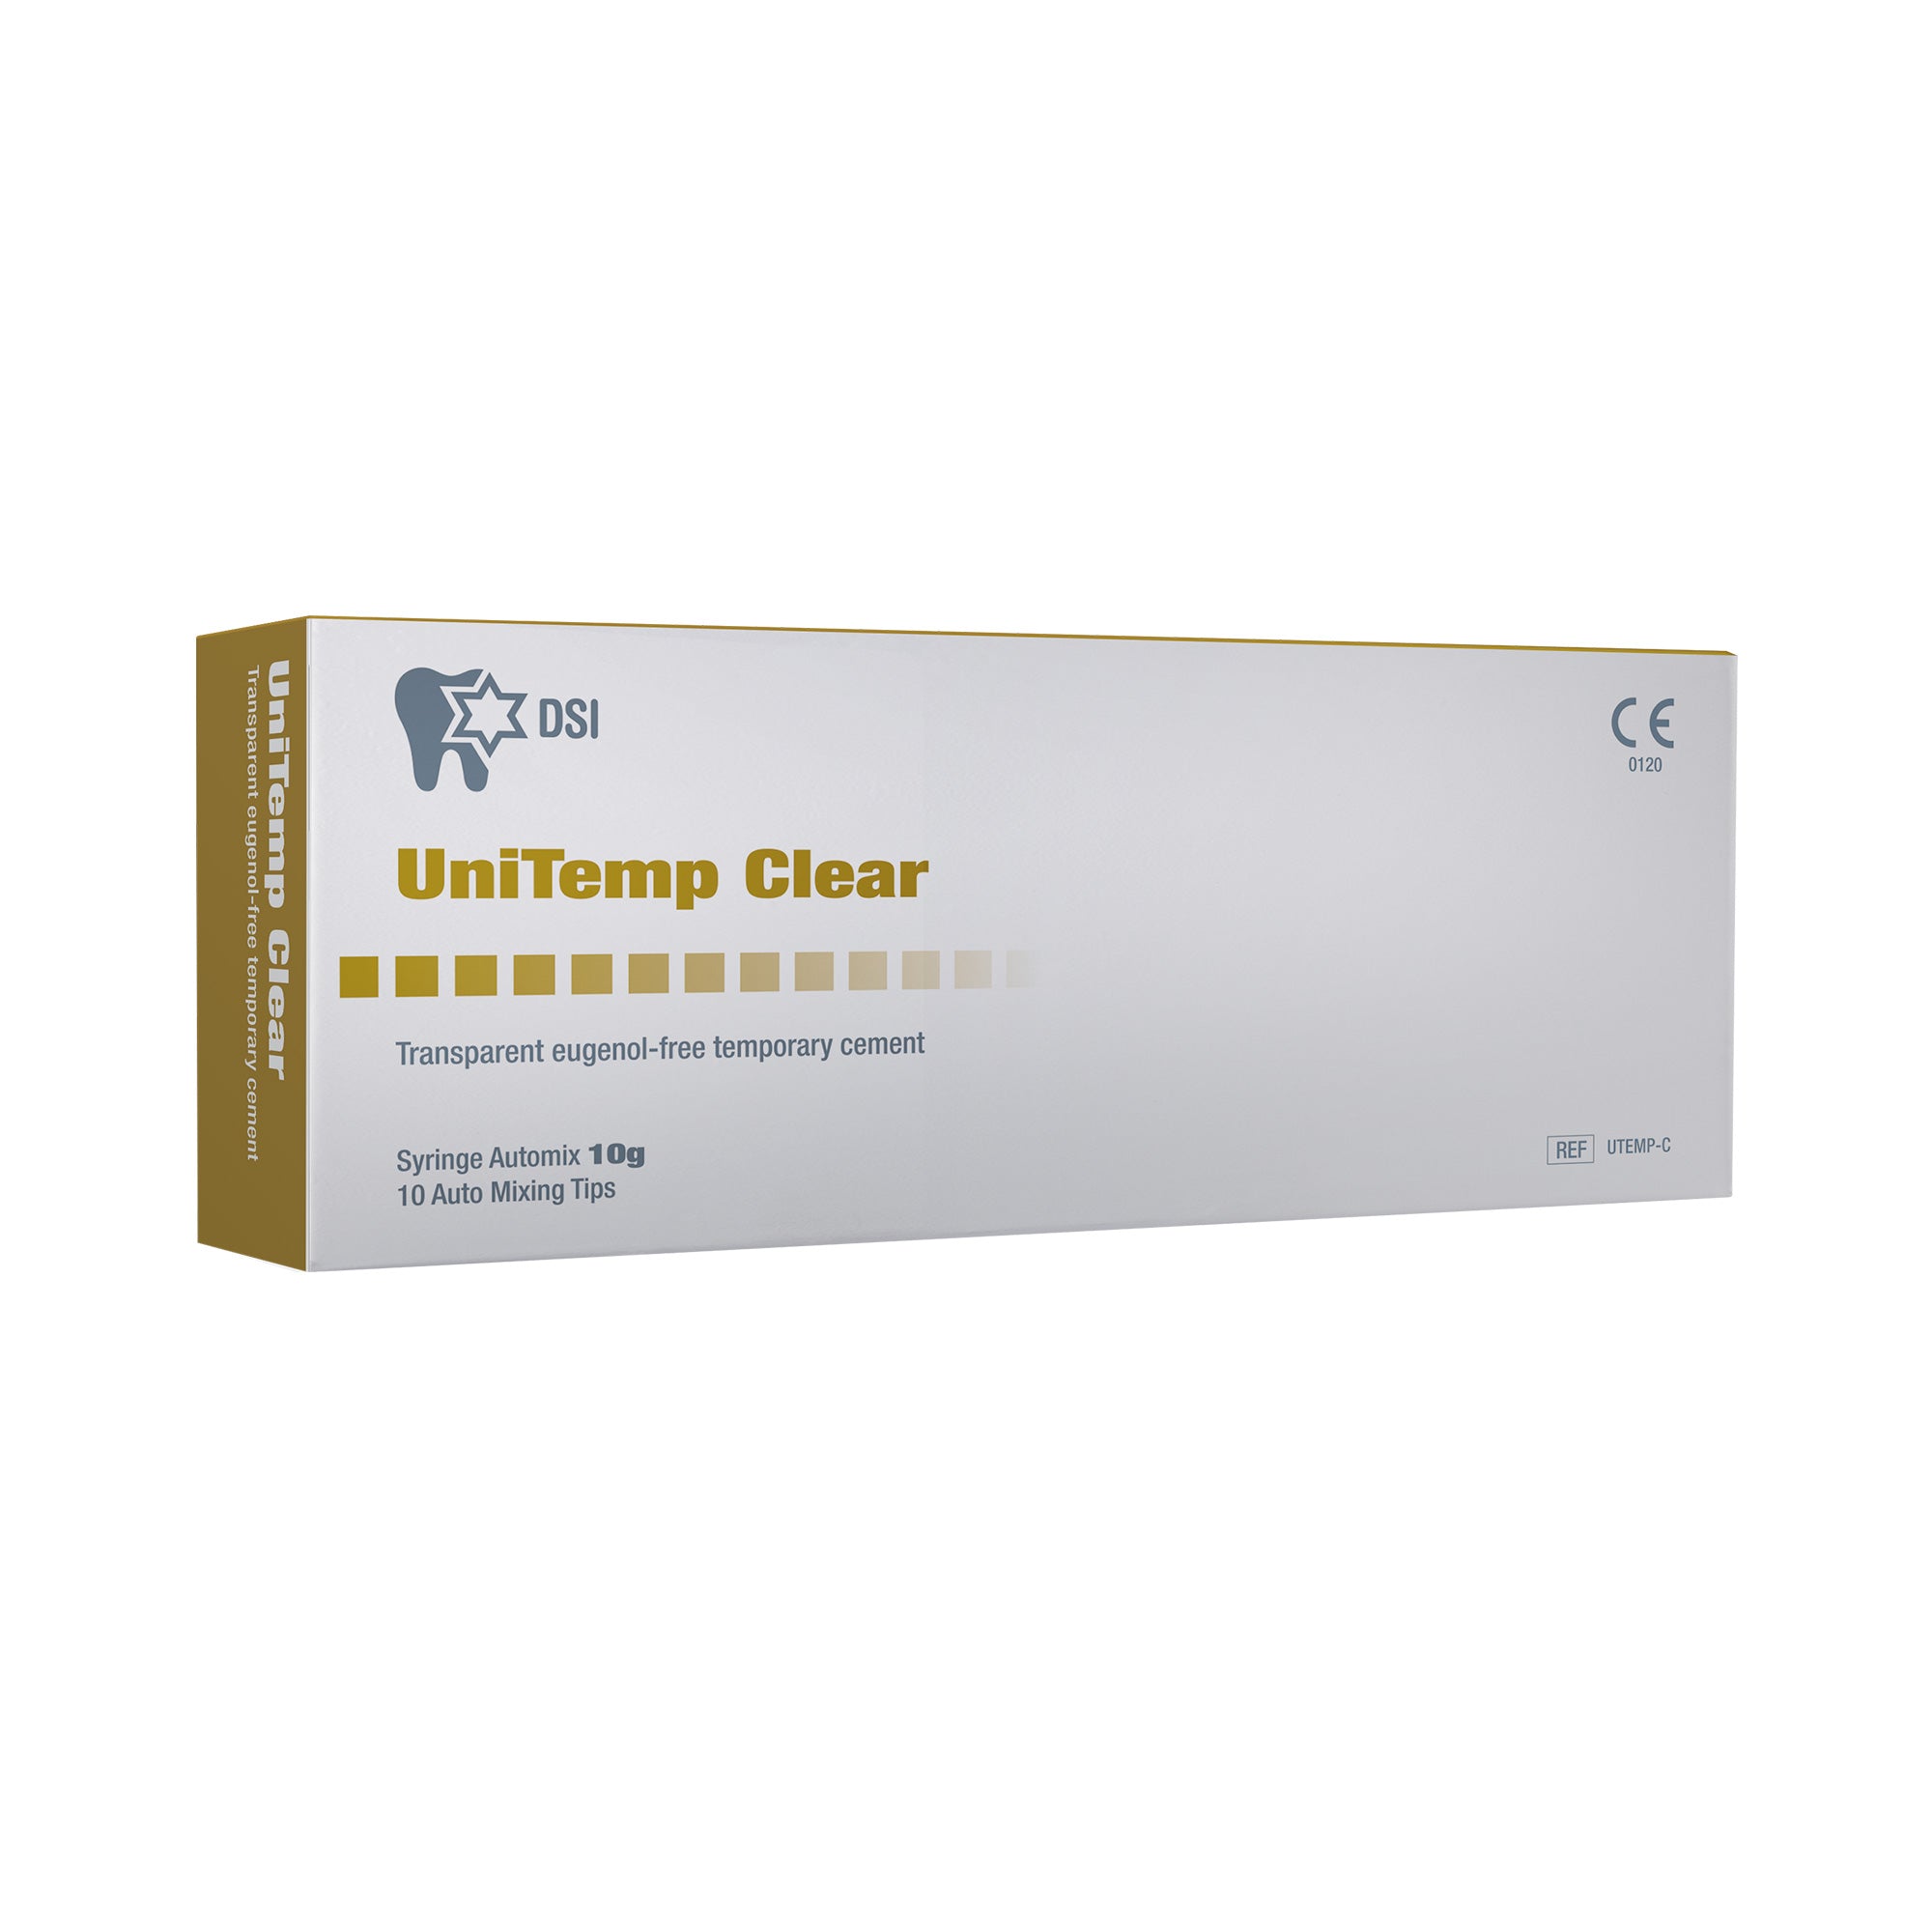 DSI UniTemp Clear Non-Eugenol Temporary Cement Automix Syringe 10g